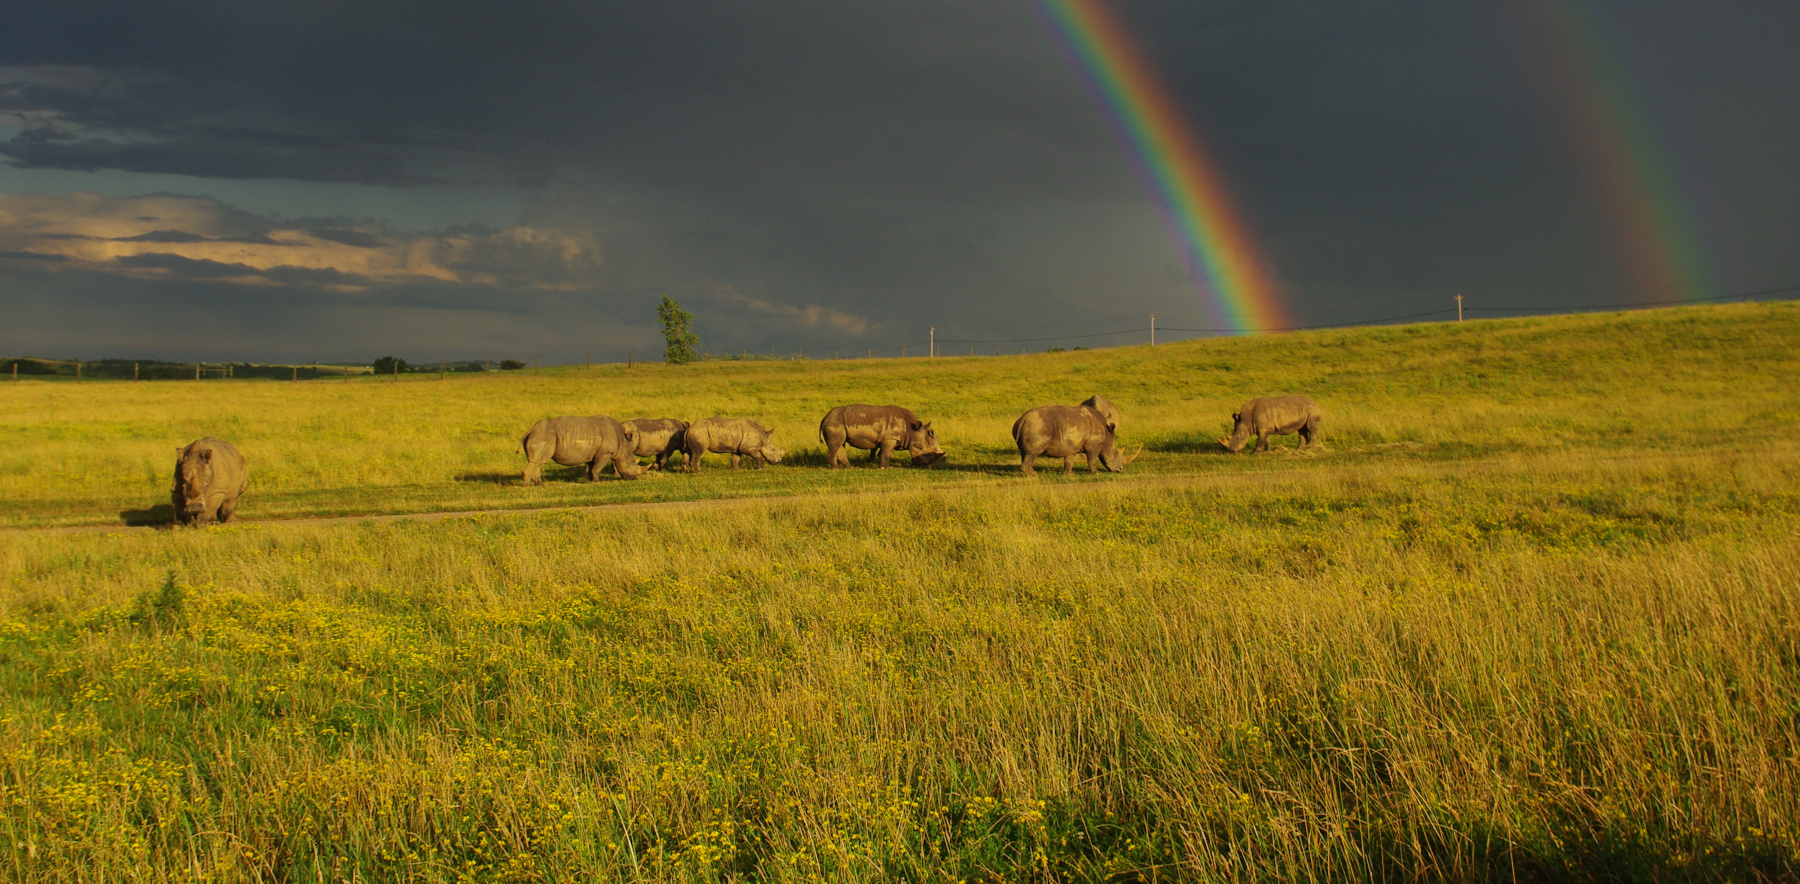 highlight for The Wilds field with rhinos and rainbows in the background